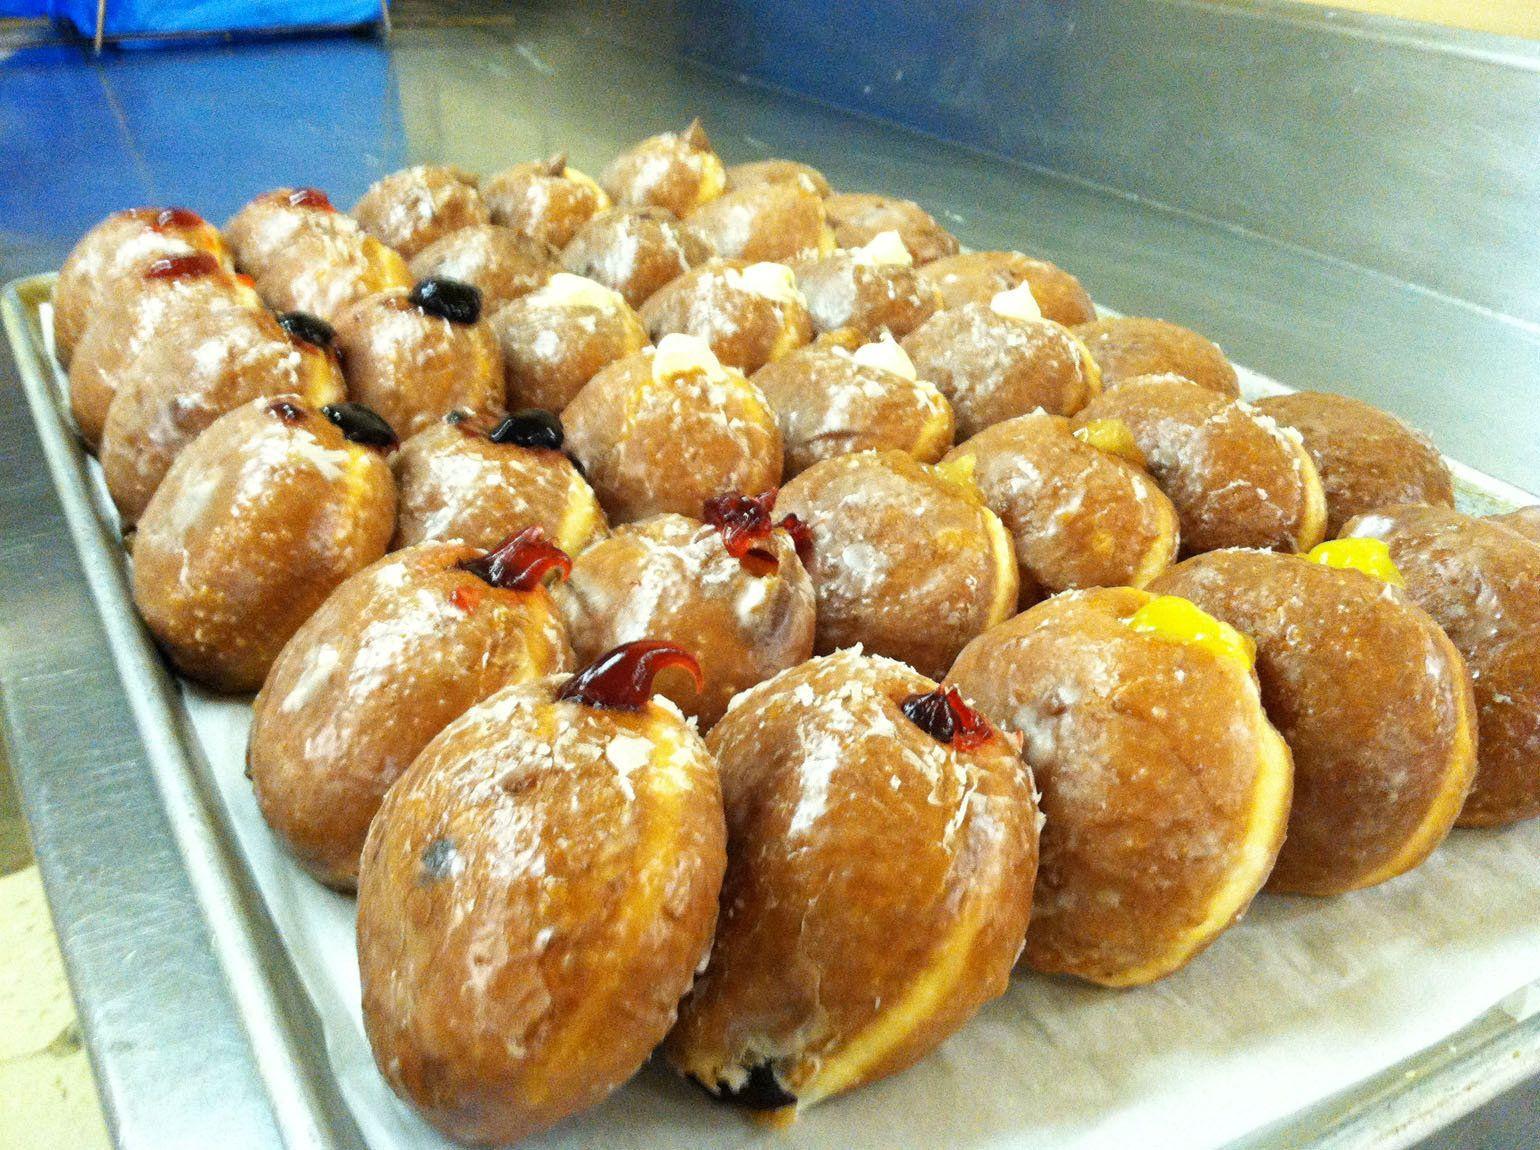 HAVE THE FATTEST OF TUESDAYS! PACZKI FOR EVERYONE!!!